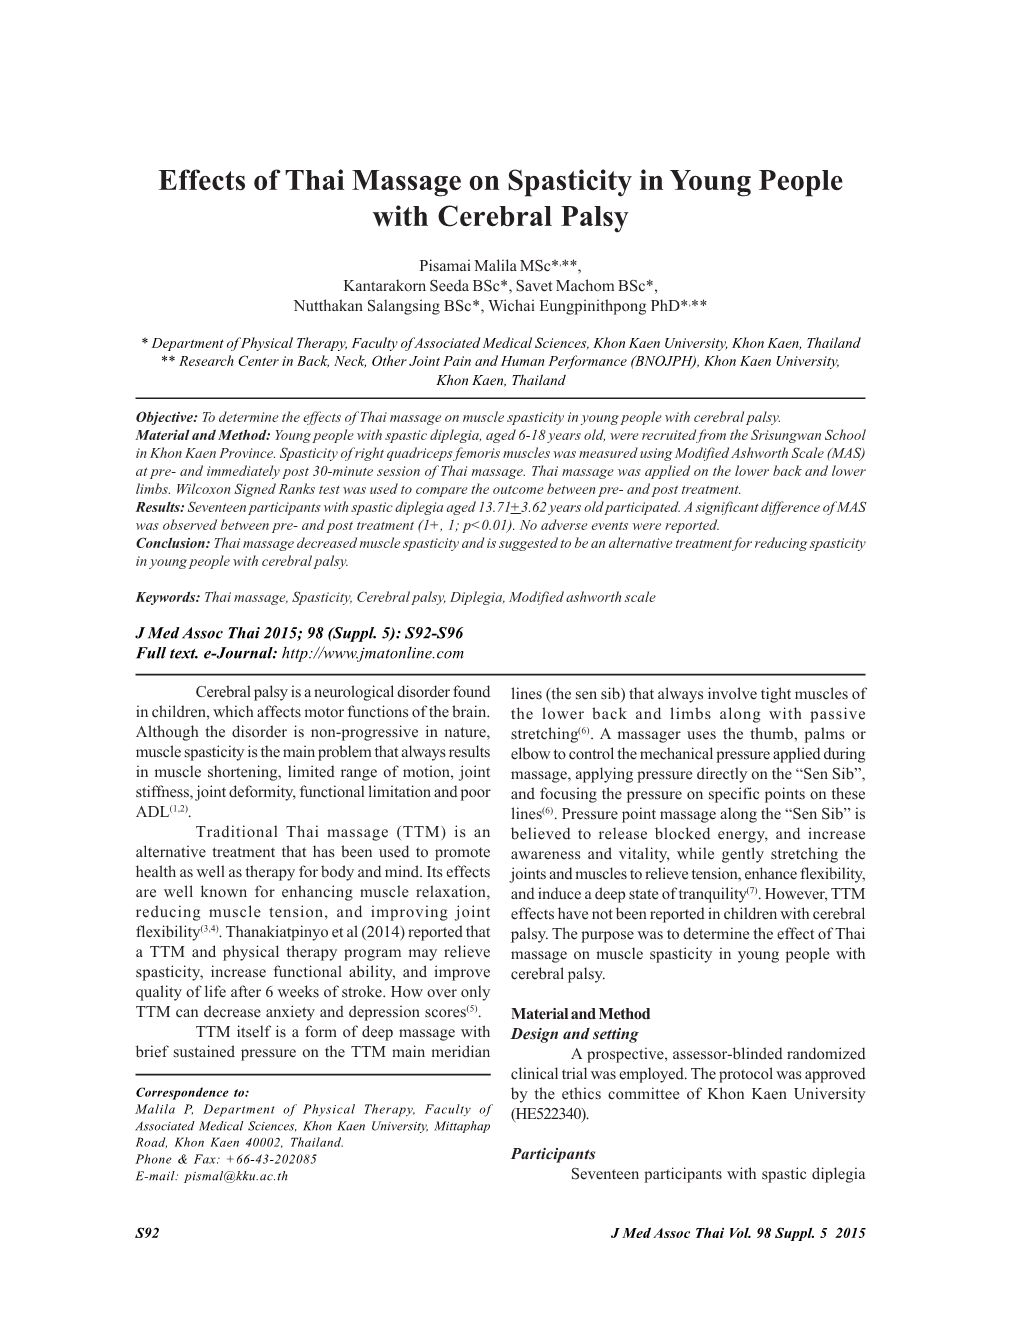 Effects of Thai Massage on Spasticity in Young People with Cerebral Palsy